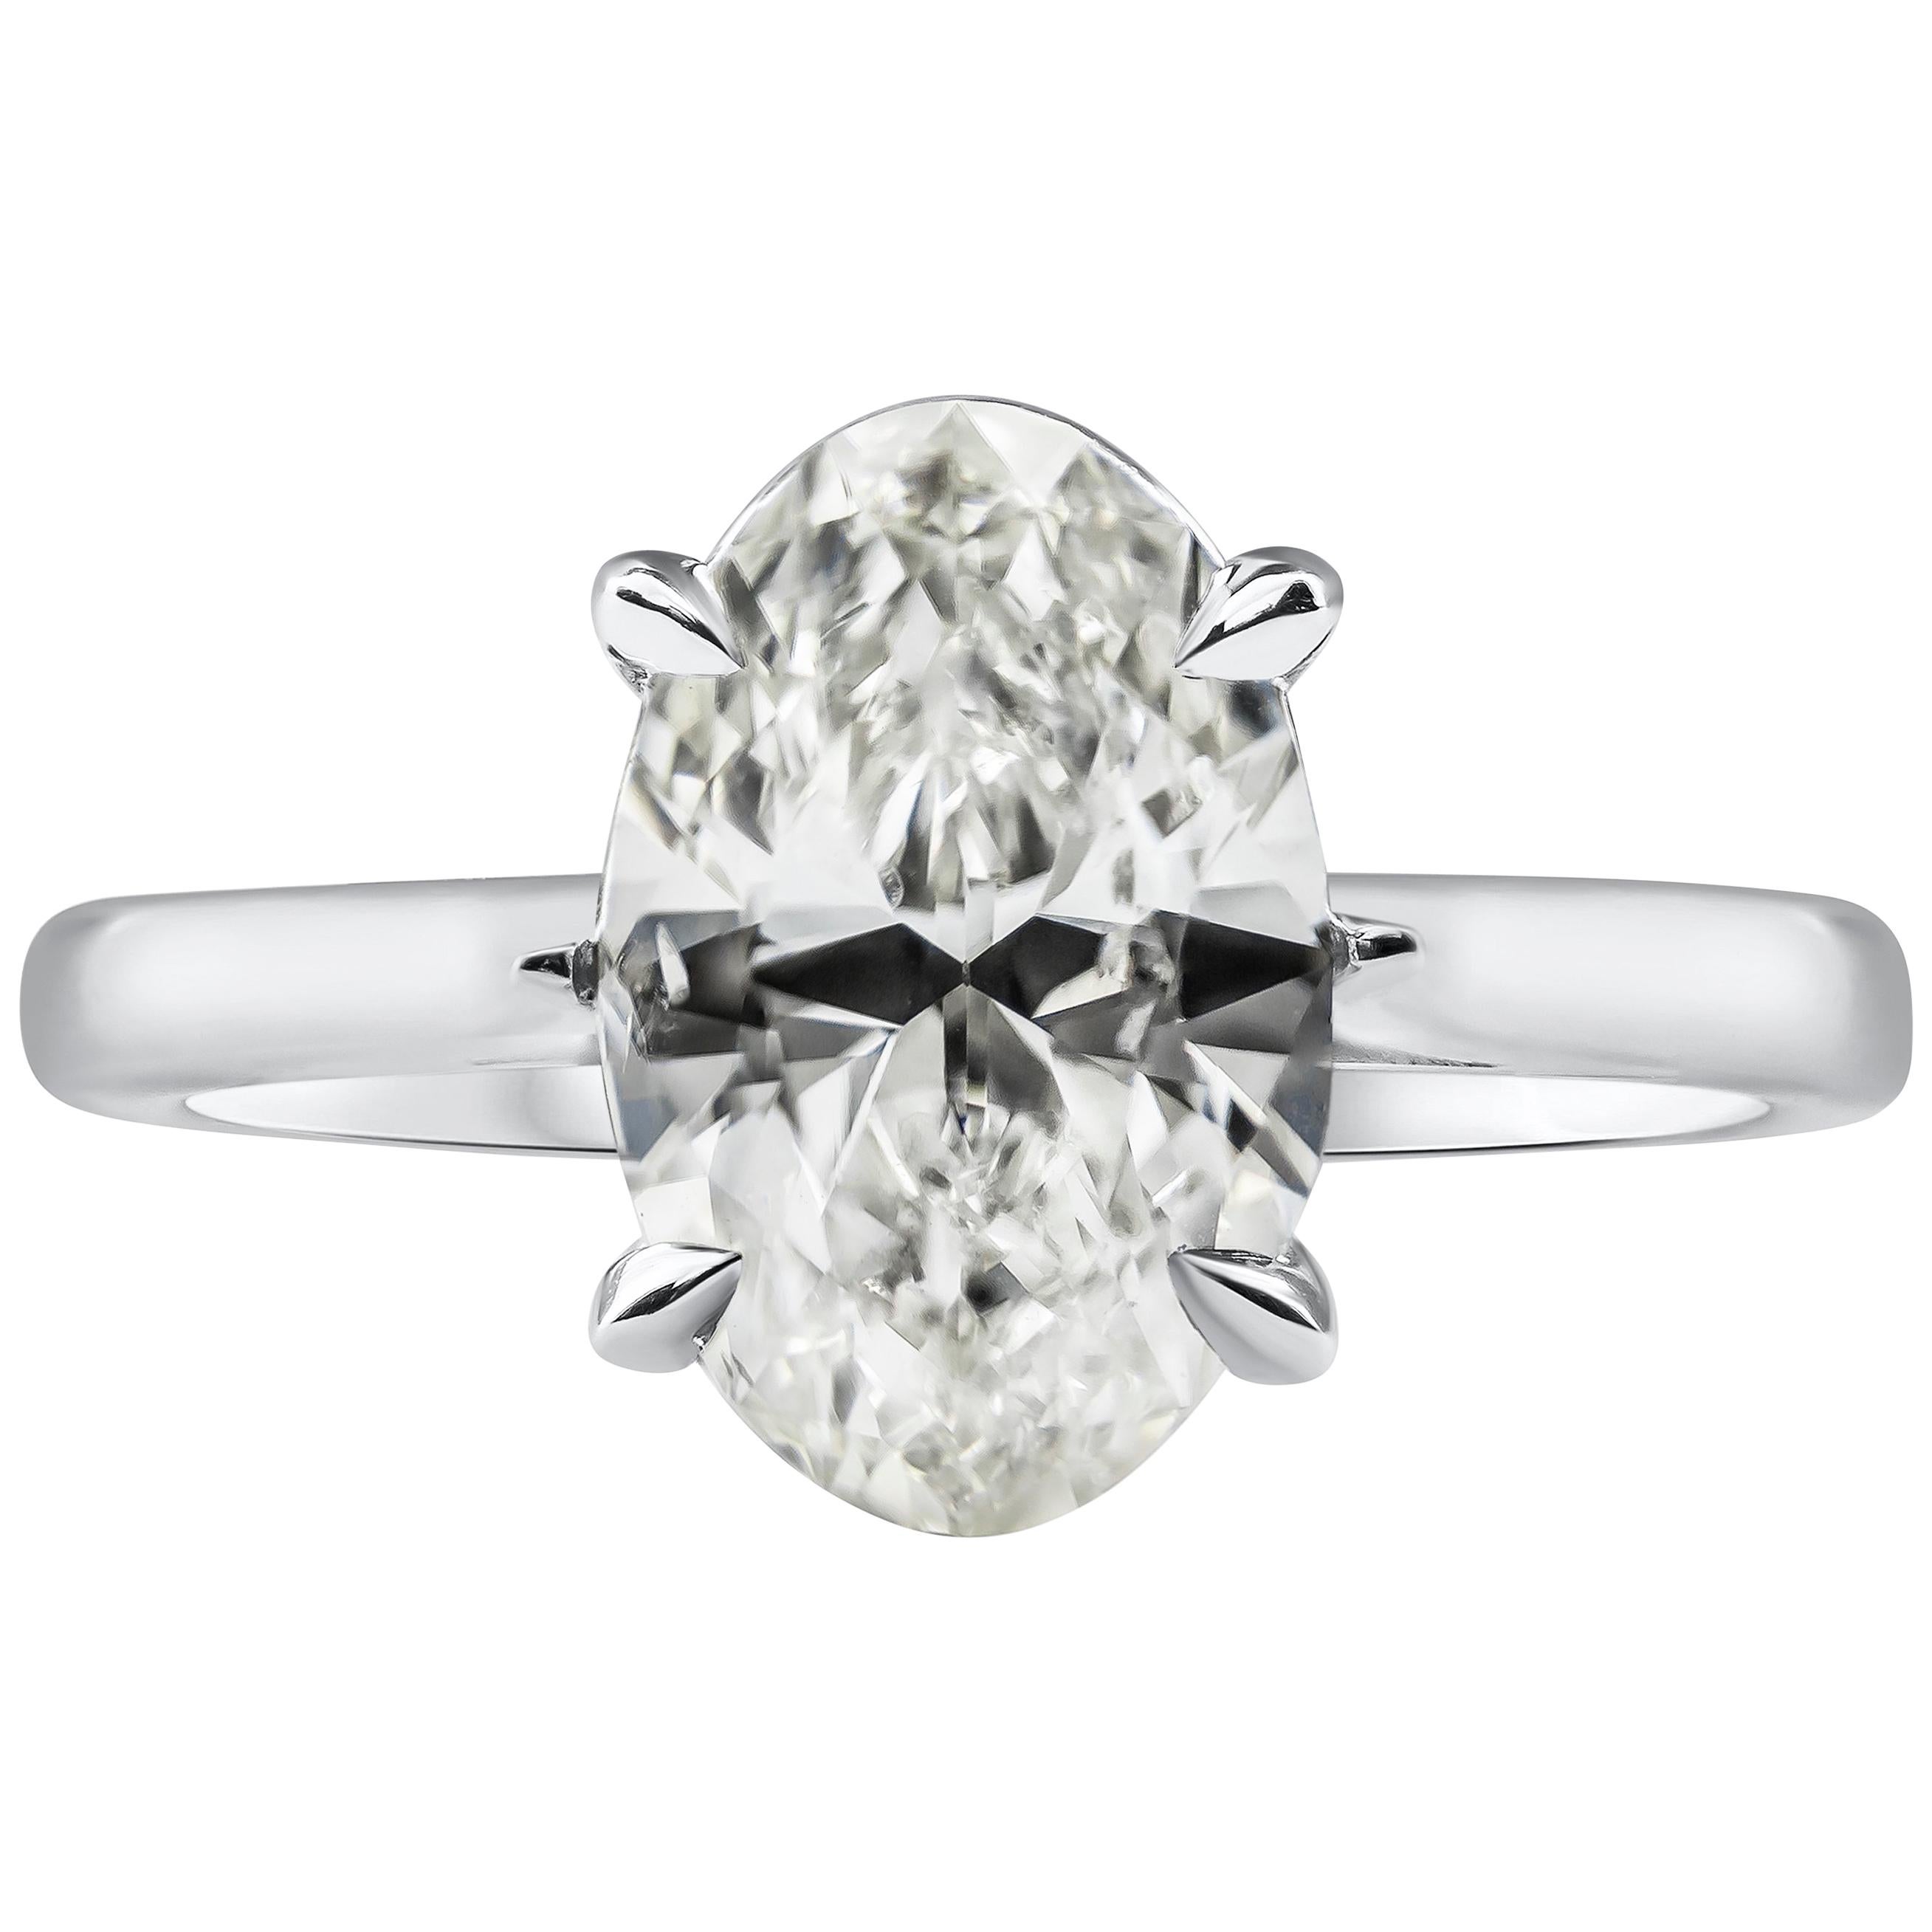 2.38 Carat Oval Cut Diamond Solitaire Engagement Ring